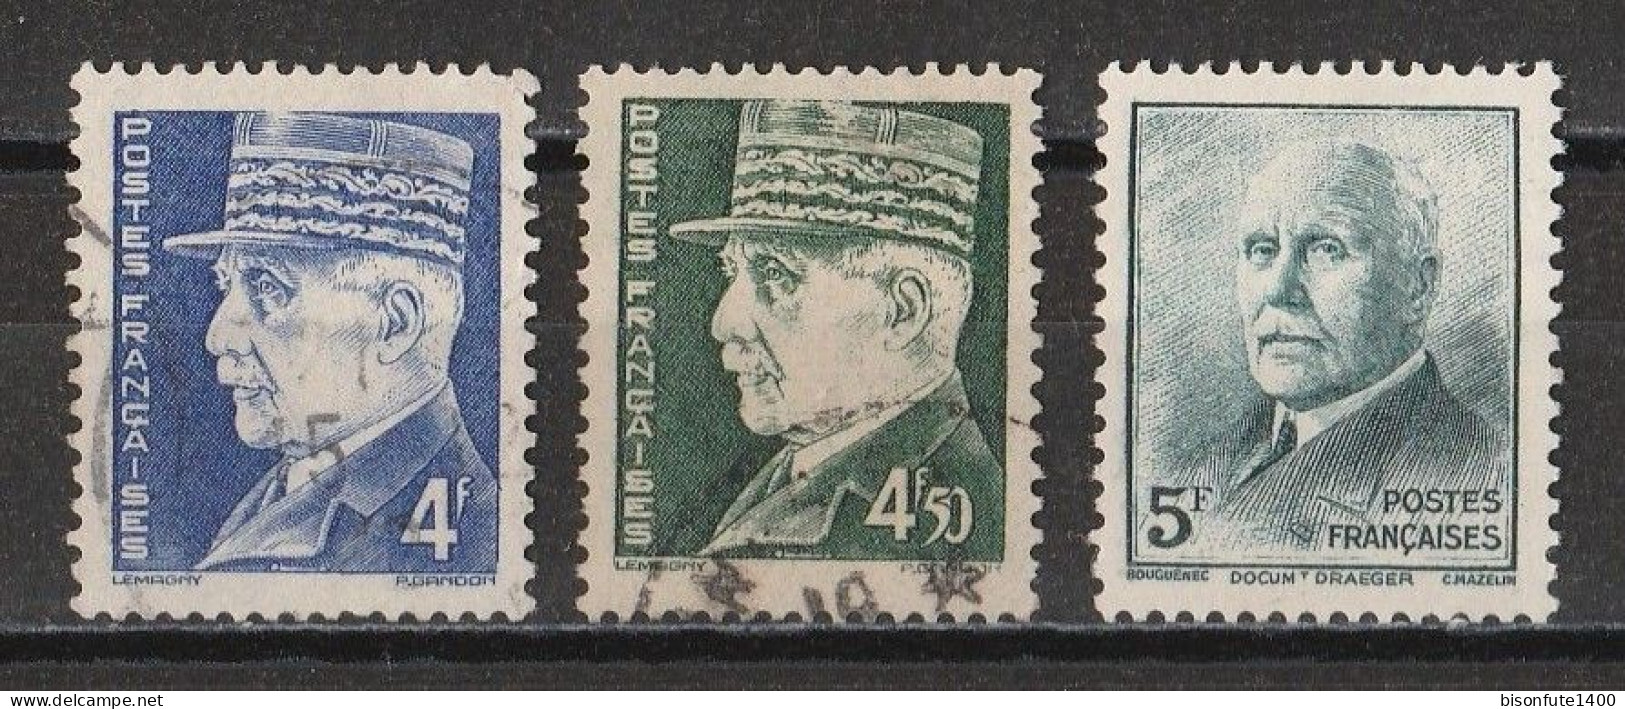 France 1941-42 : Timbres Yvert & Tellier N° 505 - 506 - 507 - 508 - 509 - 510 - 510a - 511 - 512 - 514 - 515 - 516 -... - Usati